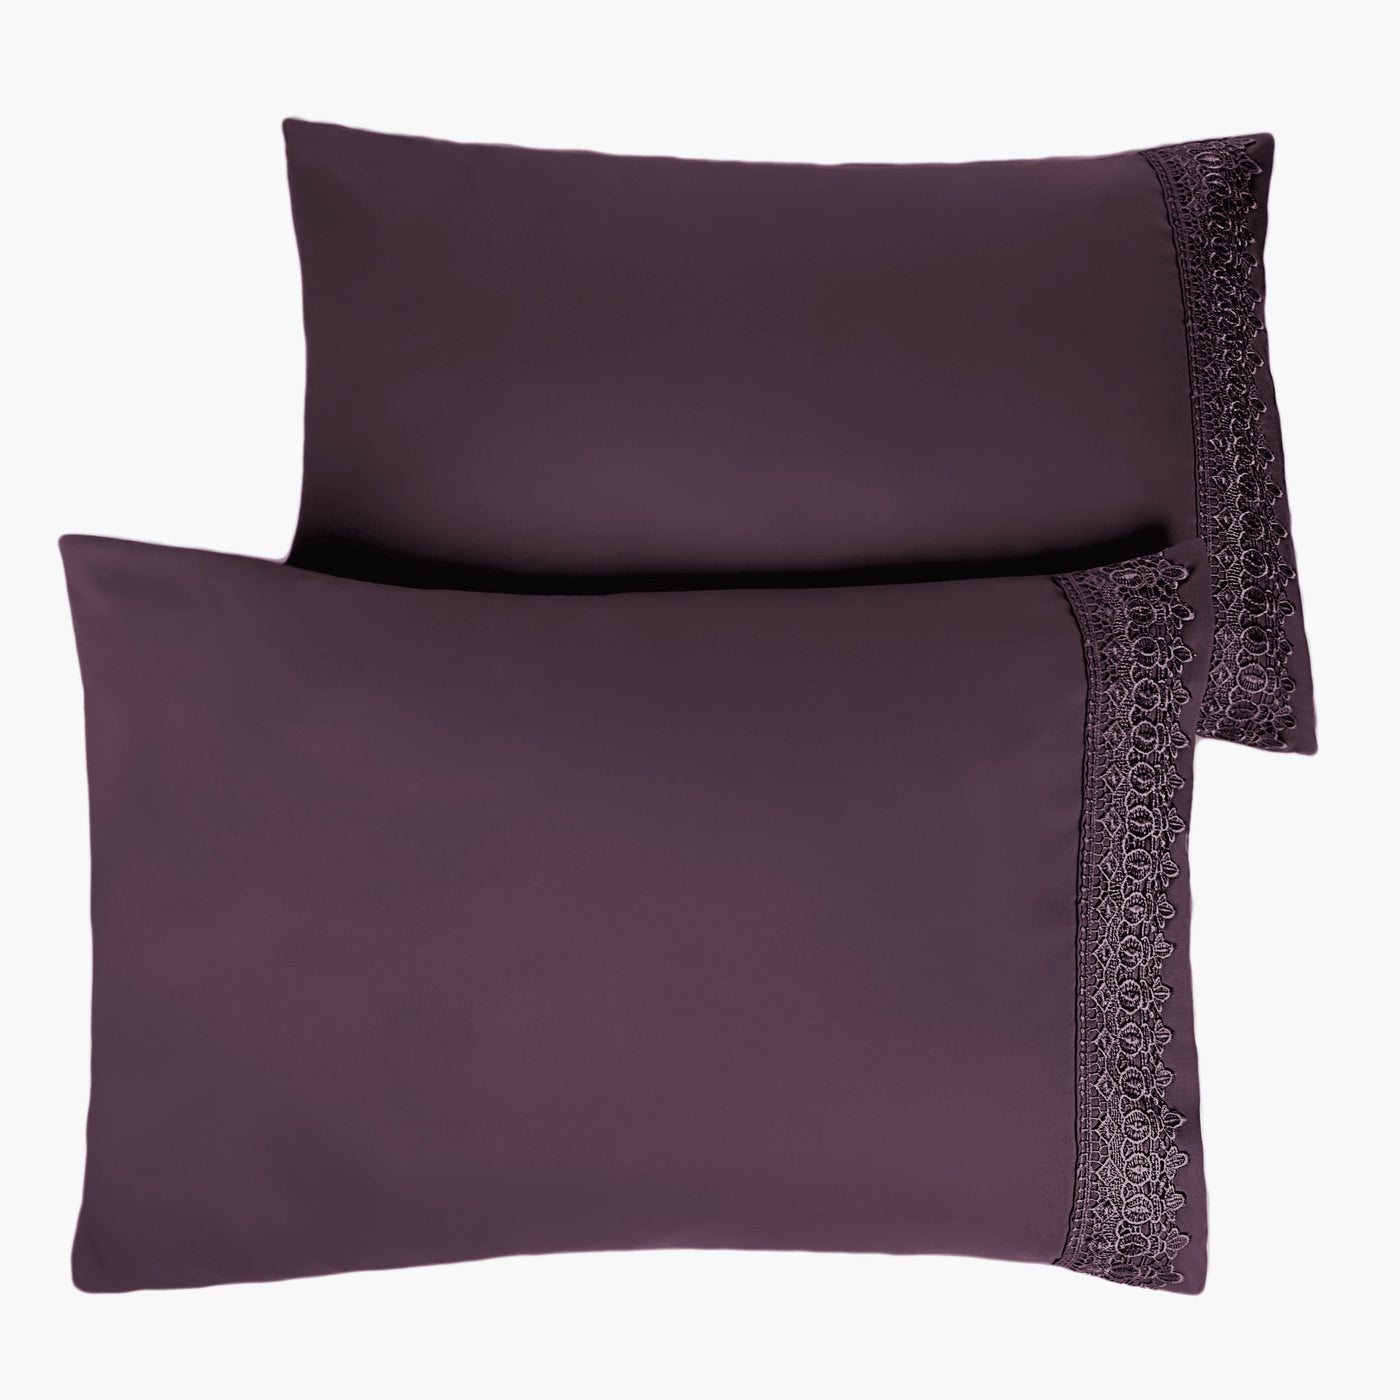 Two Vilano Lace Hem Pillow Cases in Purple Stack Together#color_vilano-purple